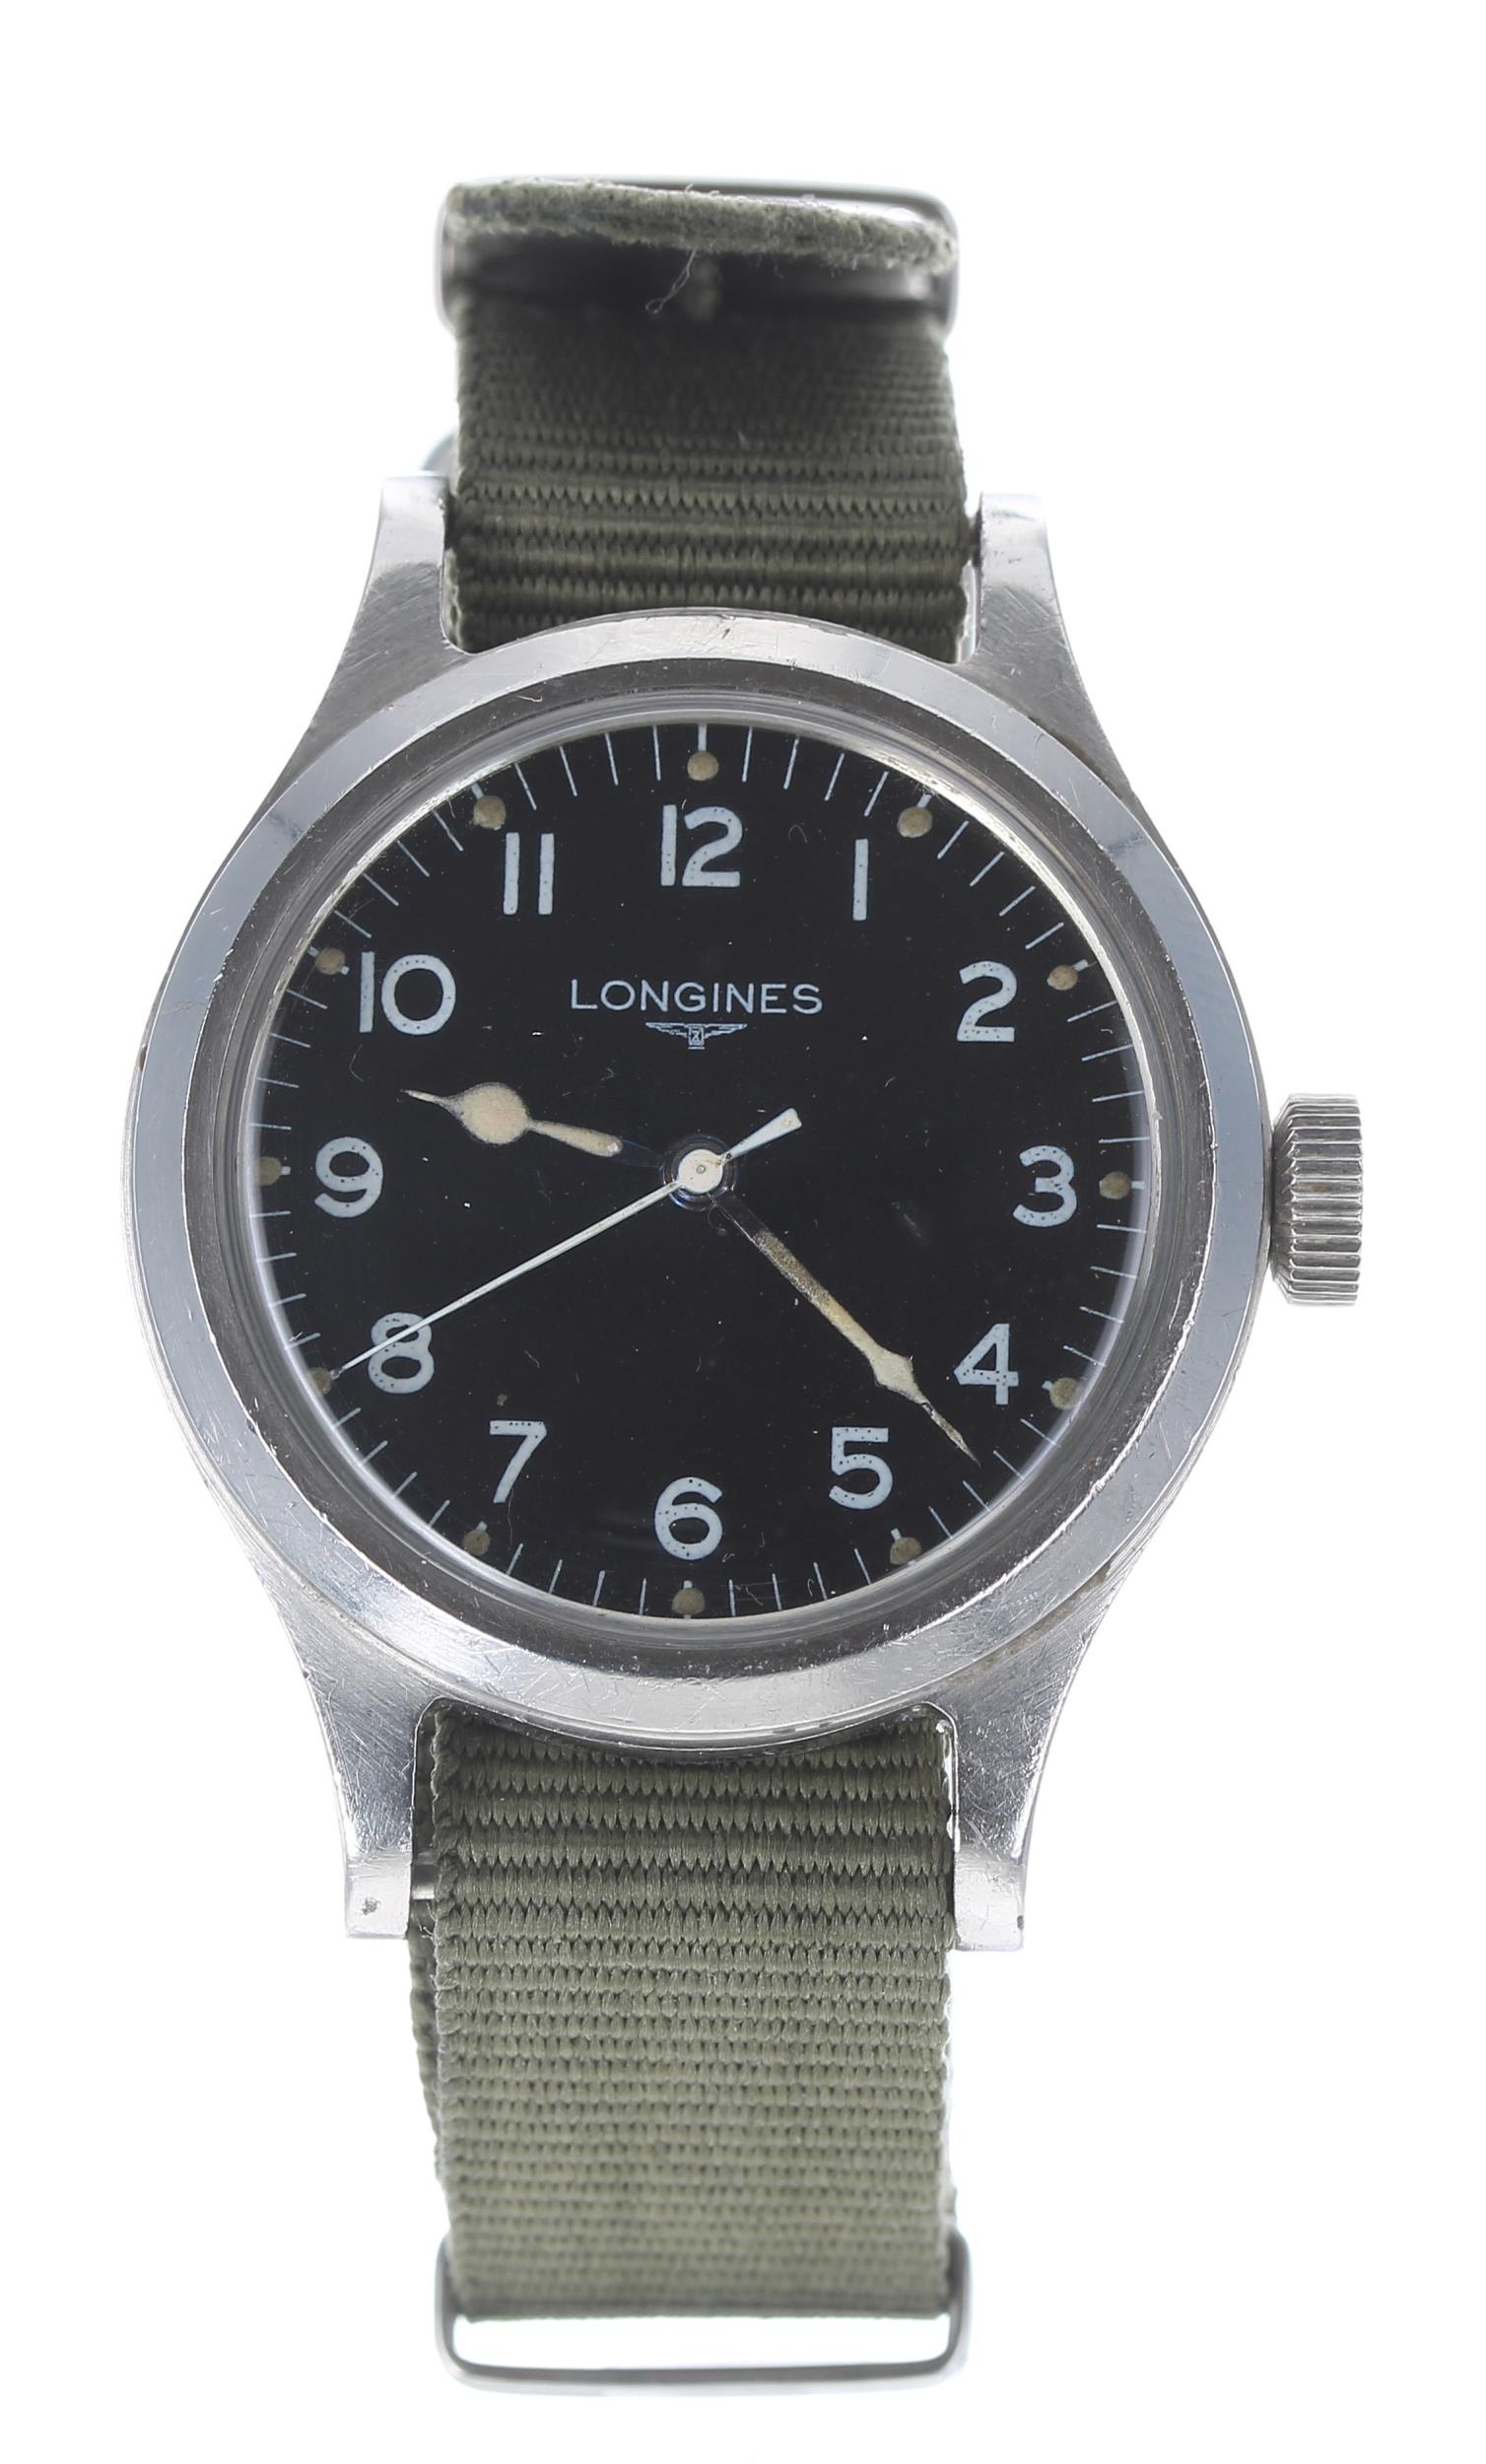 Longines R.A.F issue stainless steel pilot's wristwatch, movement no. 6108xxx, circa 1956, rare